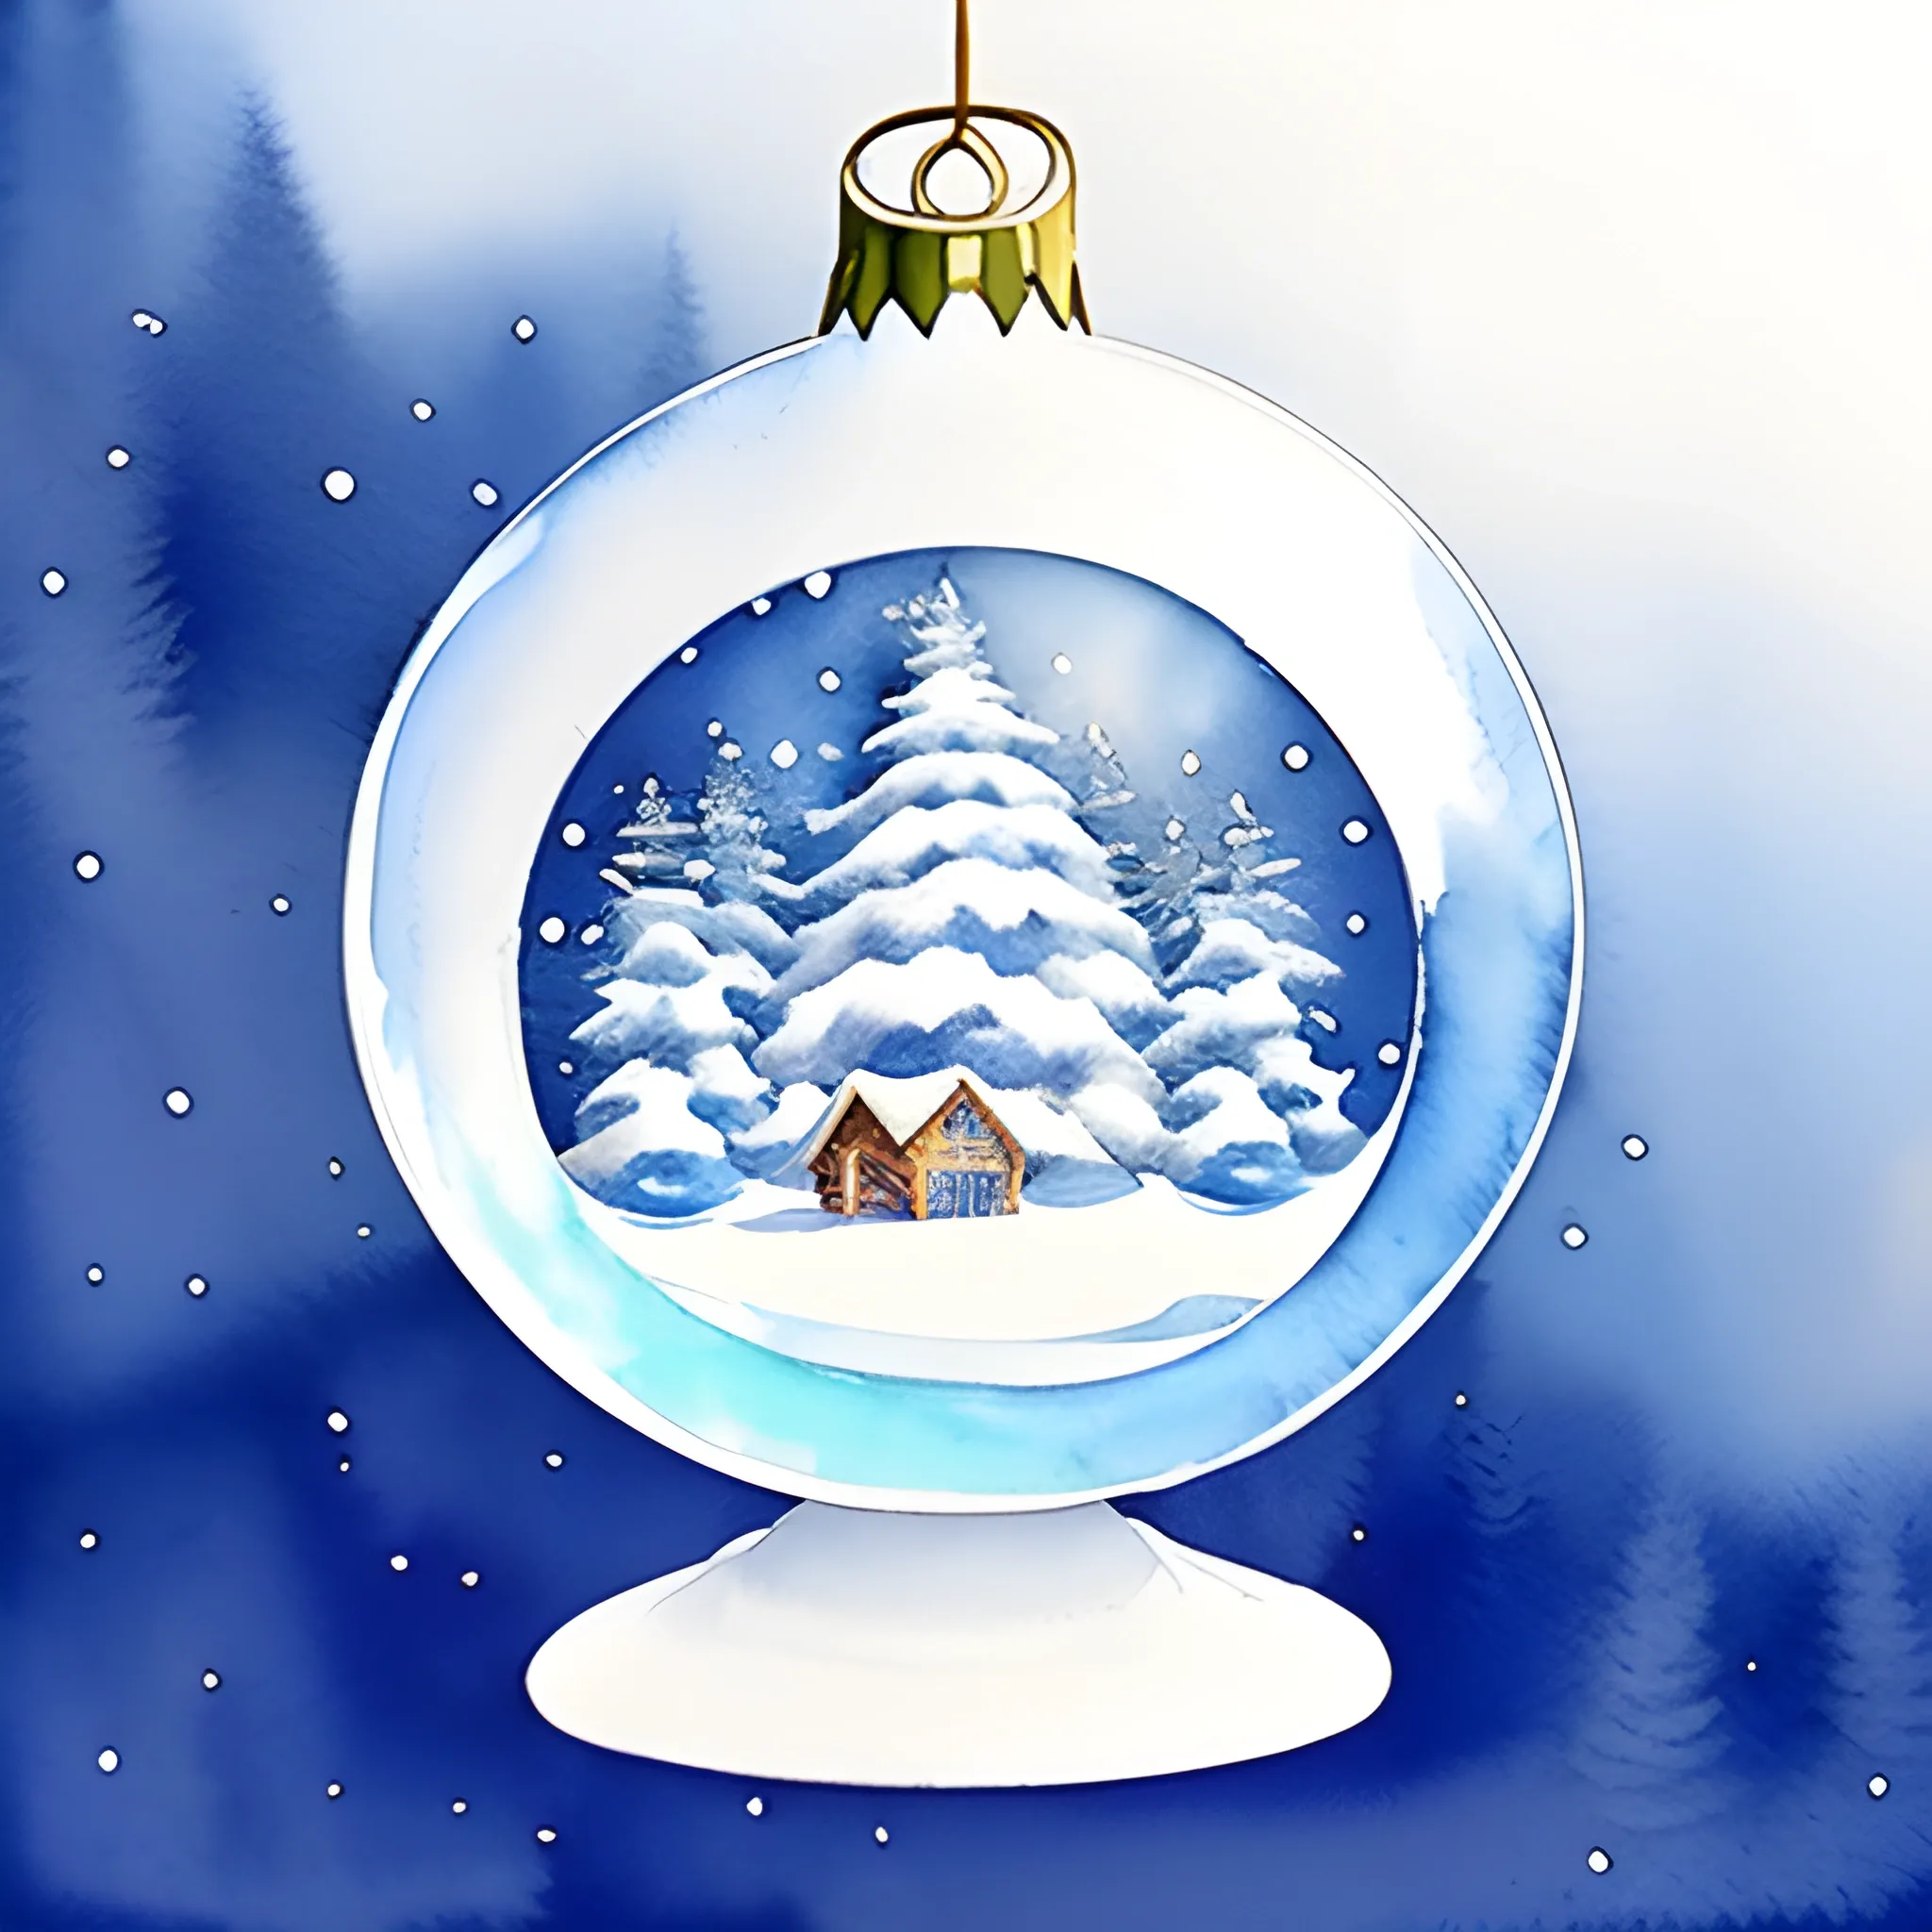 Create a mesmerizing watercolor illustration of a Christmas crystal ball seated on a simple white base. Keep the exterior pristine with no added details. Within the crystal ball, paint a tranquil scene featuring a snow-covered tree and elements evoking the North Pole. Use the unique texture of watercolors to infuse warmth and enchantment into the artwork. Let your artistic creativity shine as you breathe life into this delightful Christmas sphere!